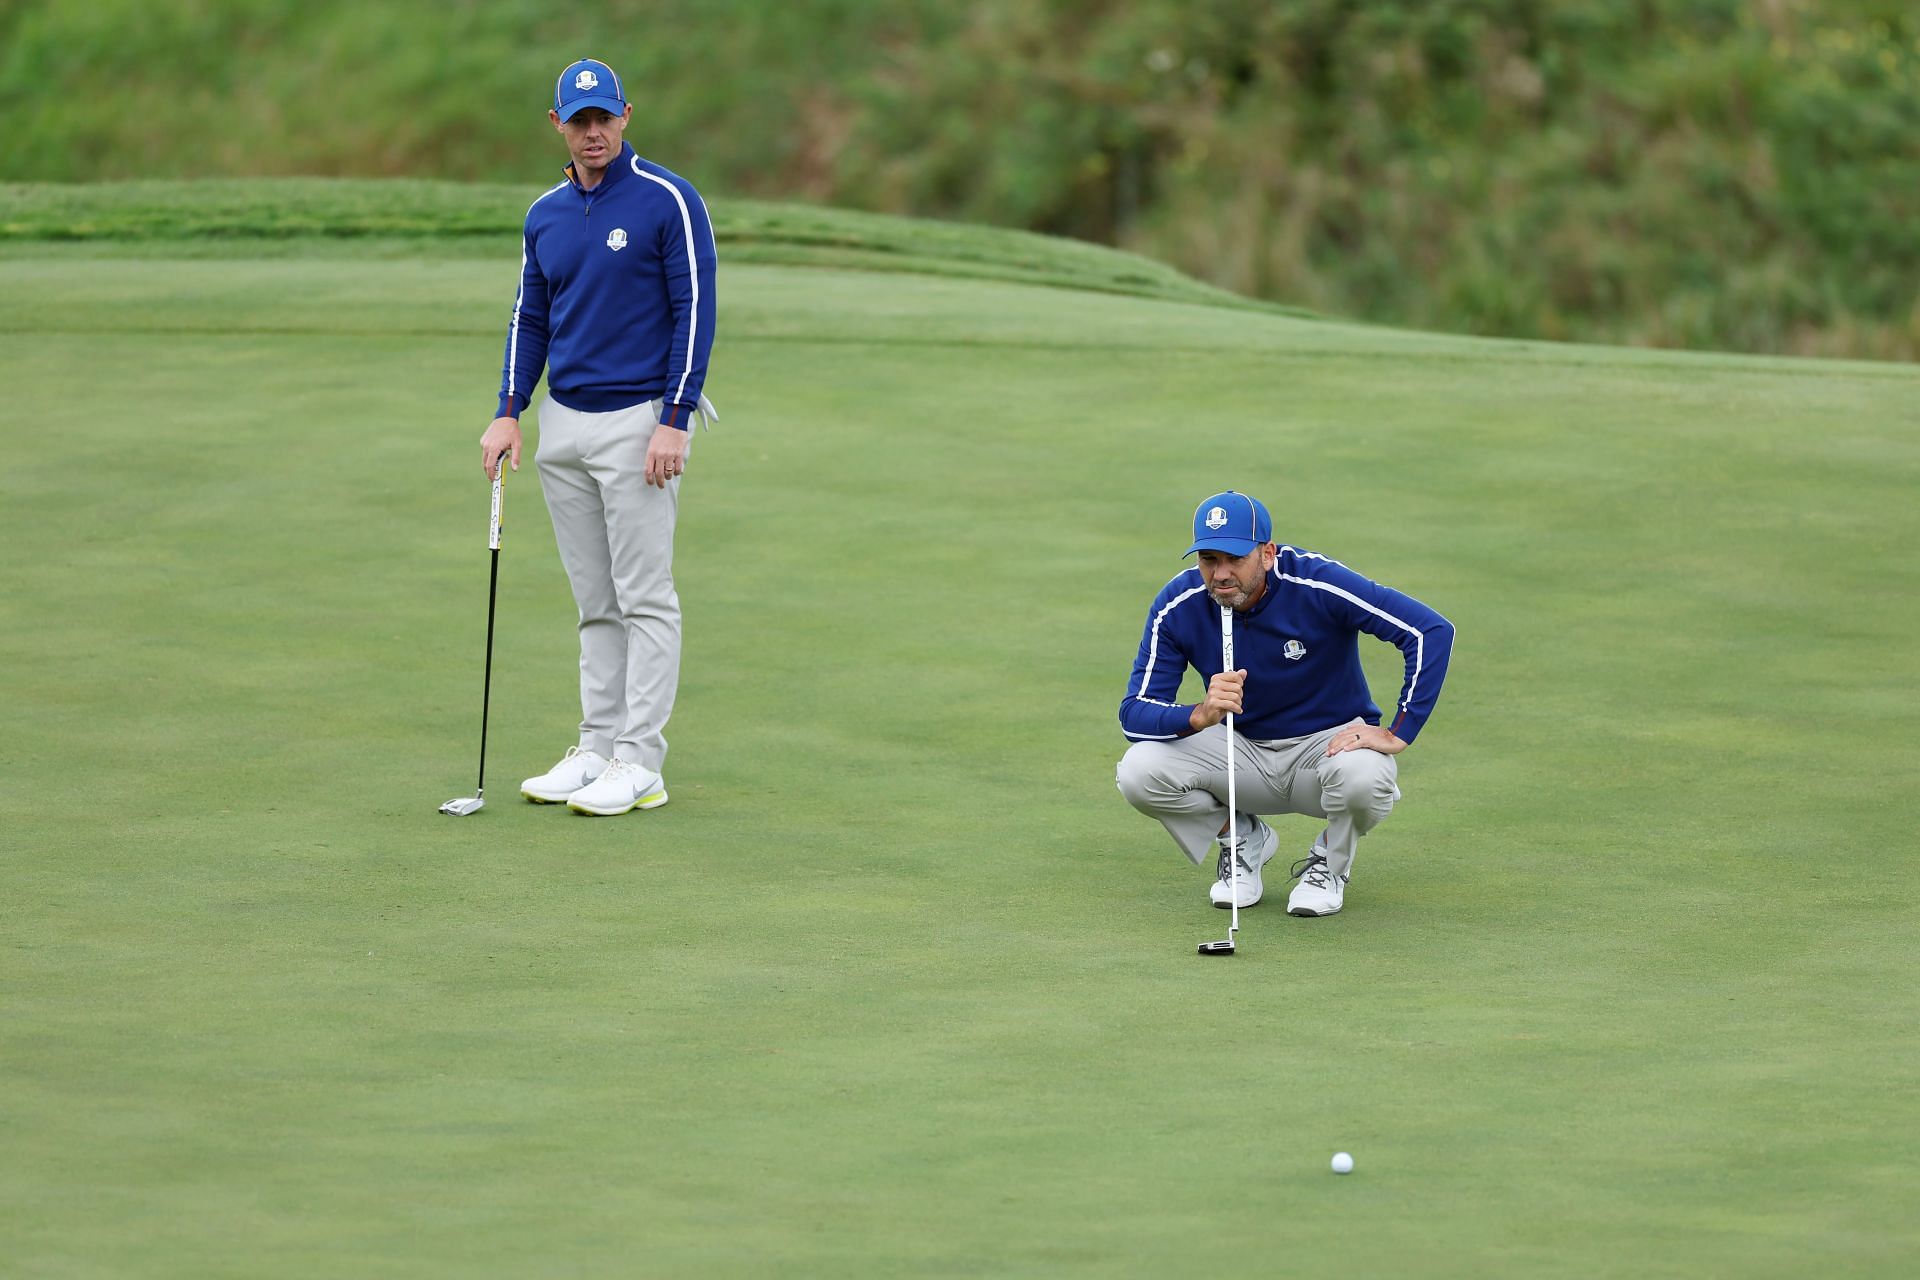 Rory McIlroy and Sergio Garcia at the 43rd Ryder Cup (Image via Getty)